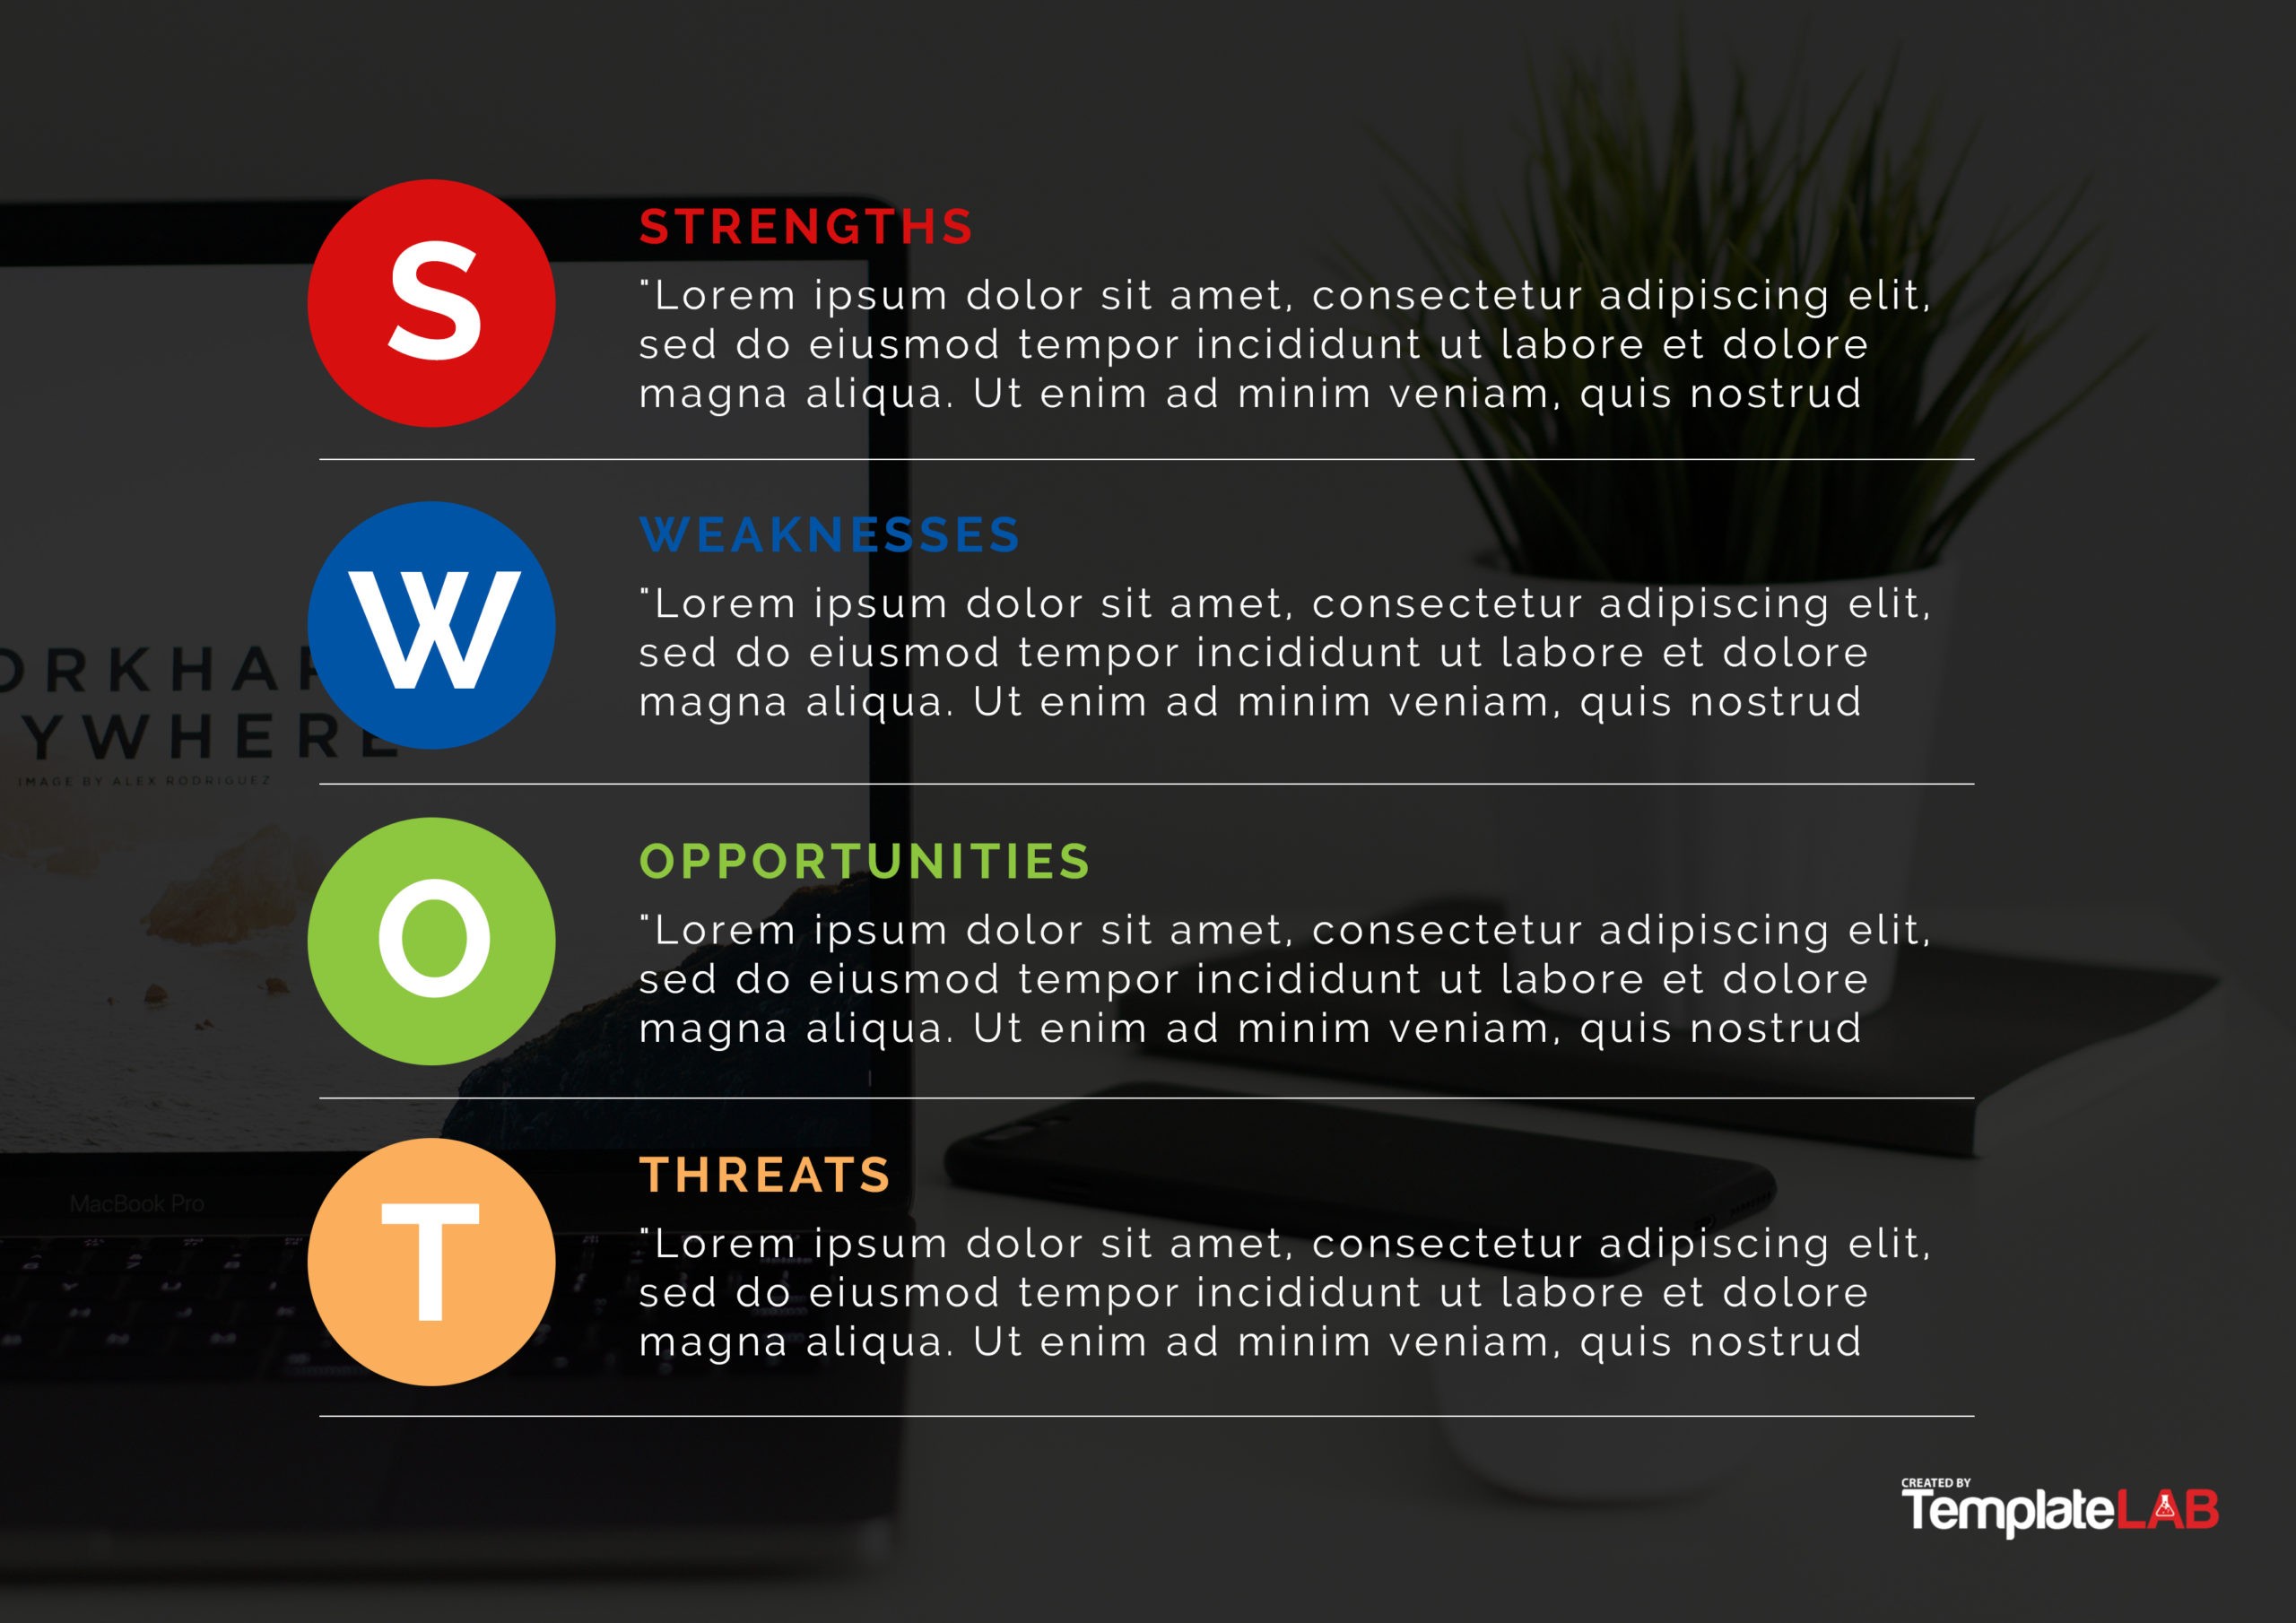 40-powerful-swot-analysis-templates-examples